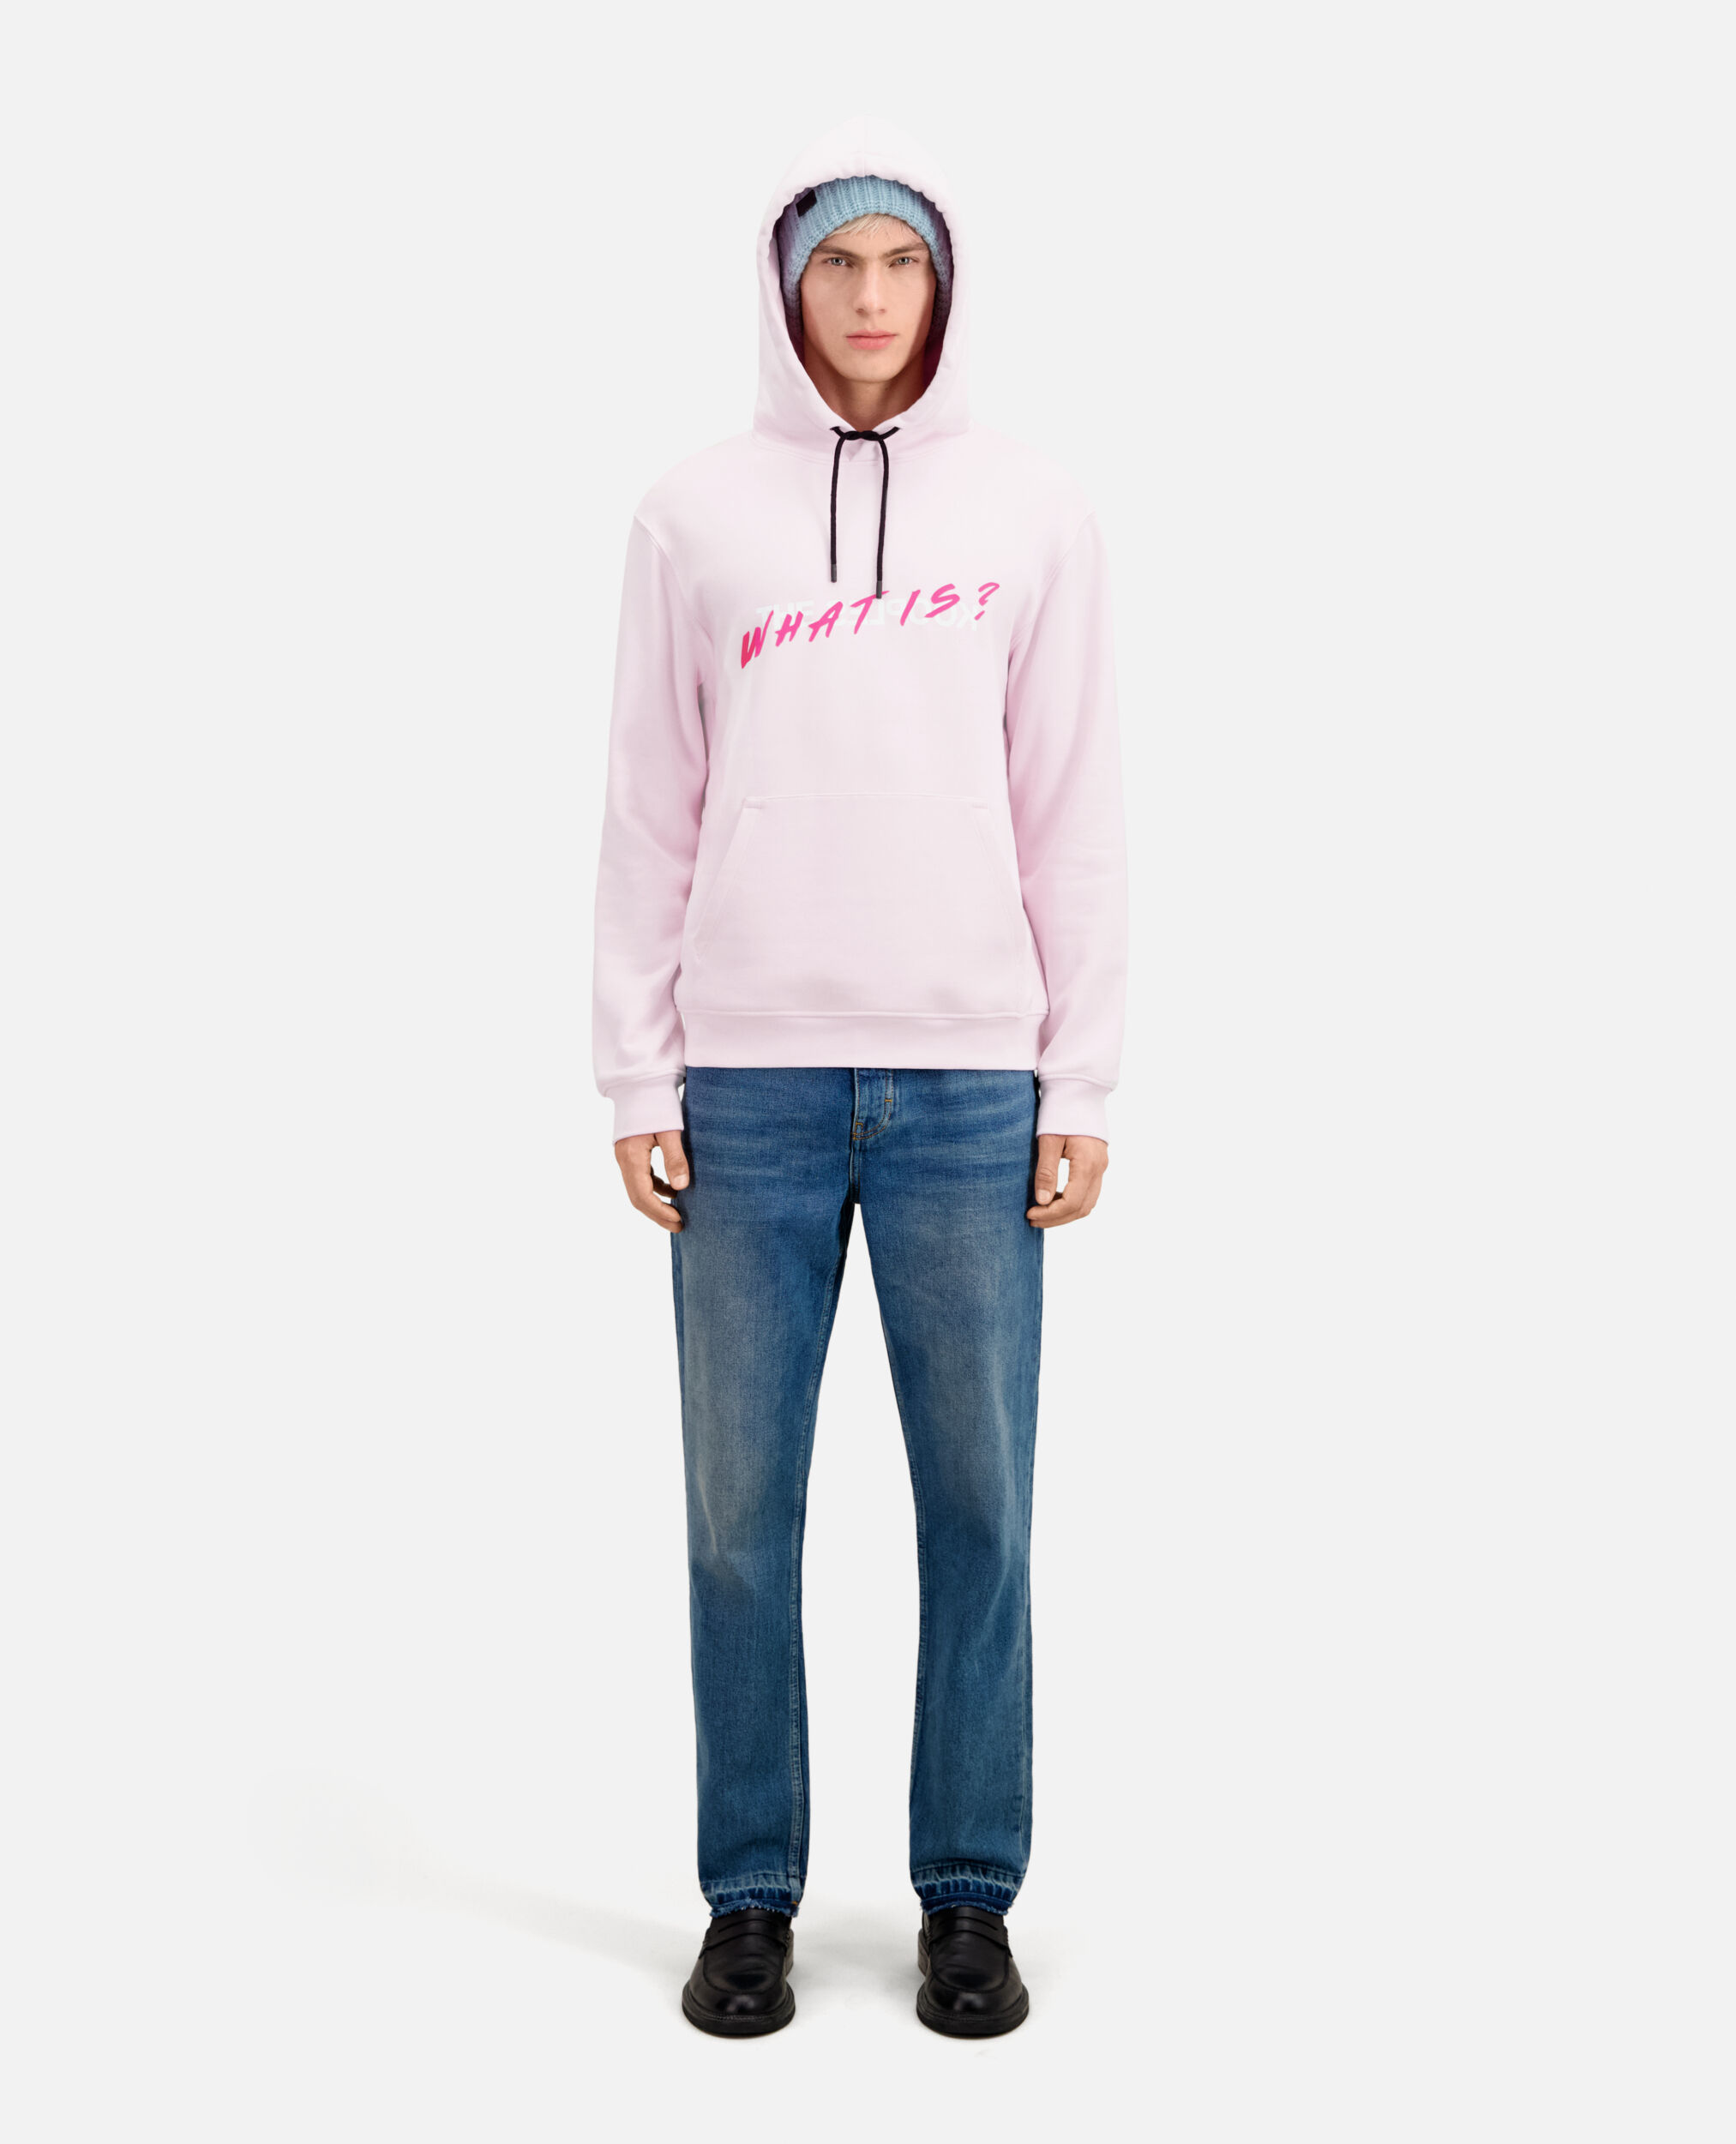 Sudadera capucha What is rosa para hombre, PALE PINK, hi-res image number null